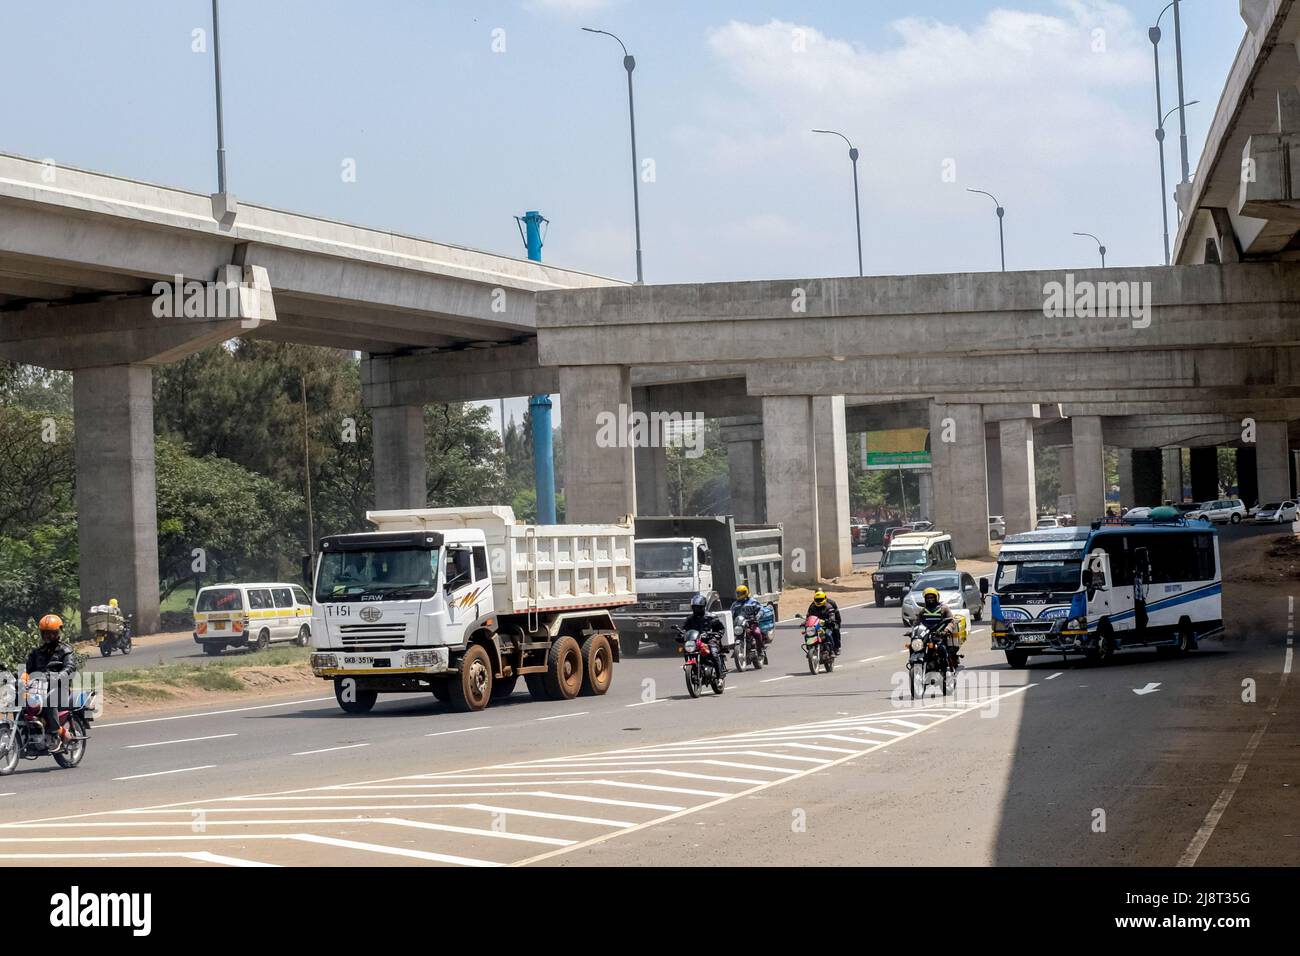 Motorists drive past the new Nairobi Expressway toll station at Haile Selassie in Nairobi. On 14th May 2022 during the official launching of the Nairobi Expressway, most Kenyan motorists were allowed to use the expressway which will in time reduce the worst traffic congestion cases ever witnessed. Motorists are allowed to either pay through Manual Toll Collection or Electric Toll Collection in order to drive through the road. The road will be operated by Moja Expressway, a subsidiary of China Road and Bridge Corporation for the next 27 years. (Photo by Donwilson Odhiambo / SOPA Images/Sipa USA Stock Photo